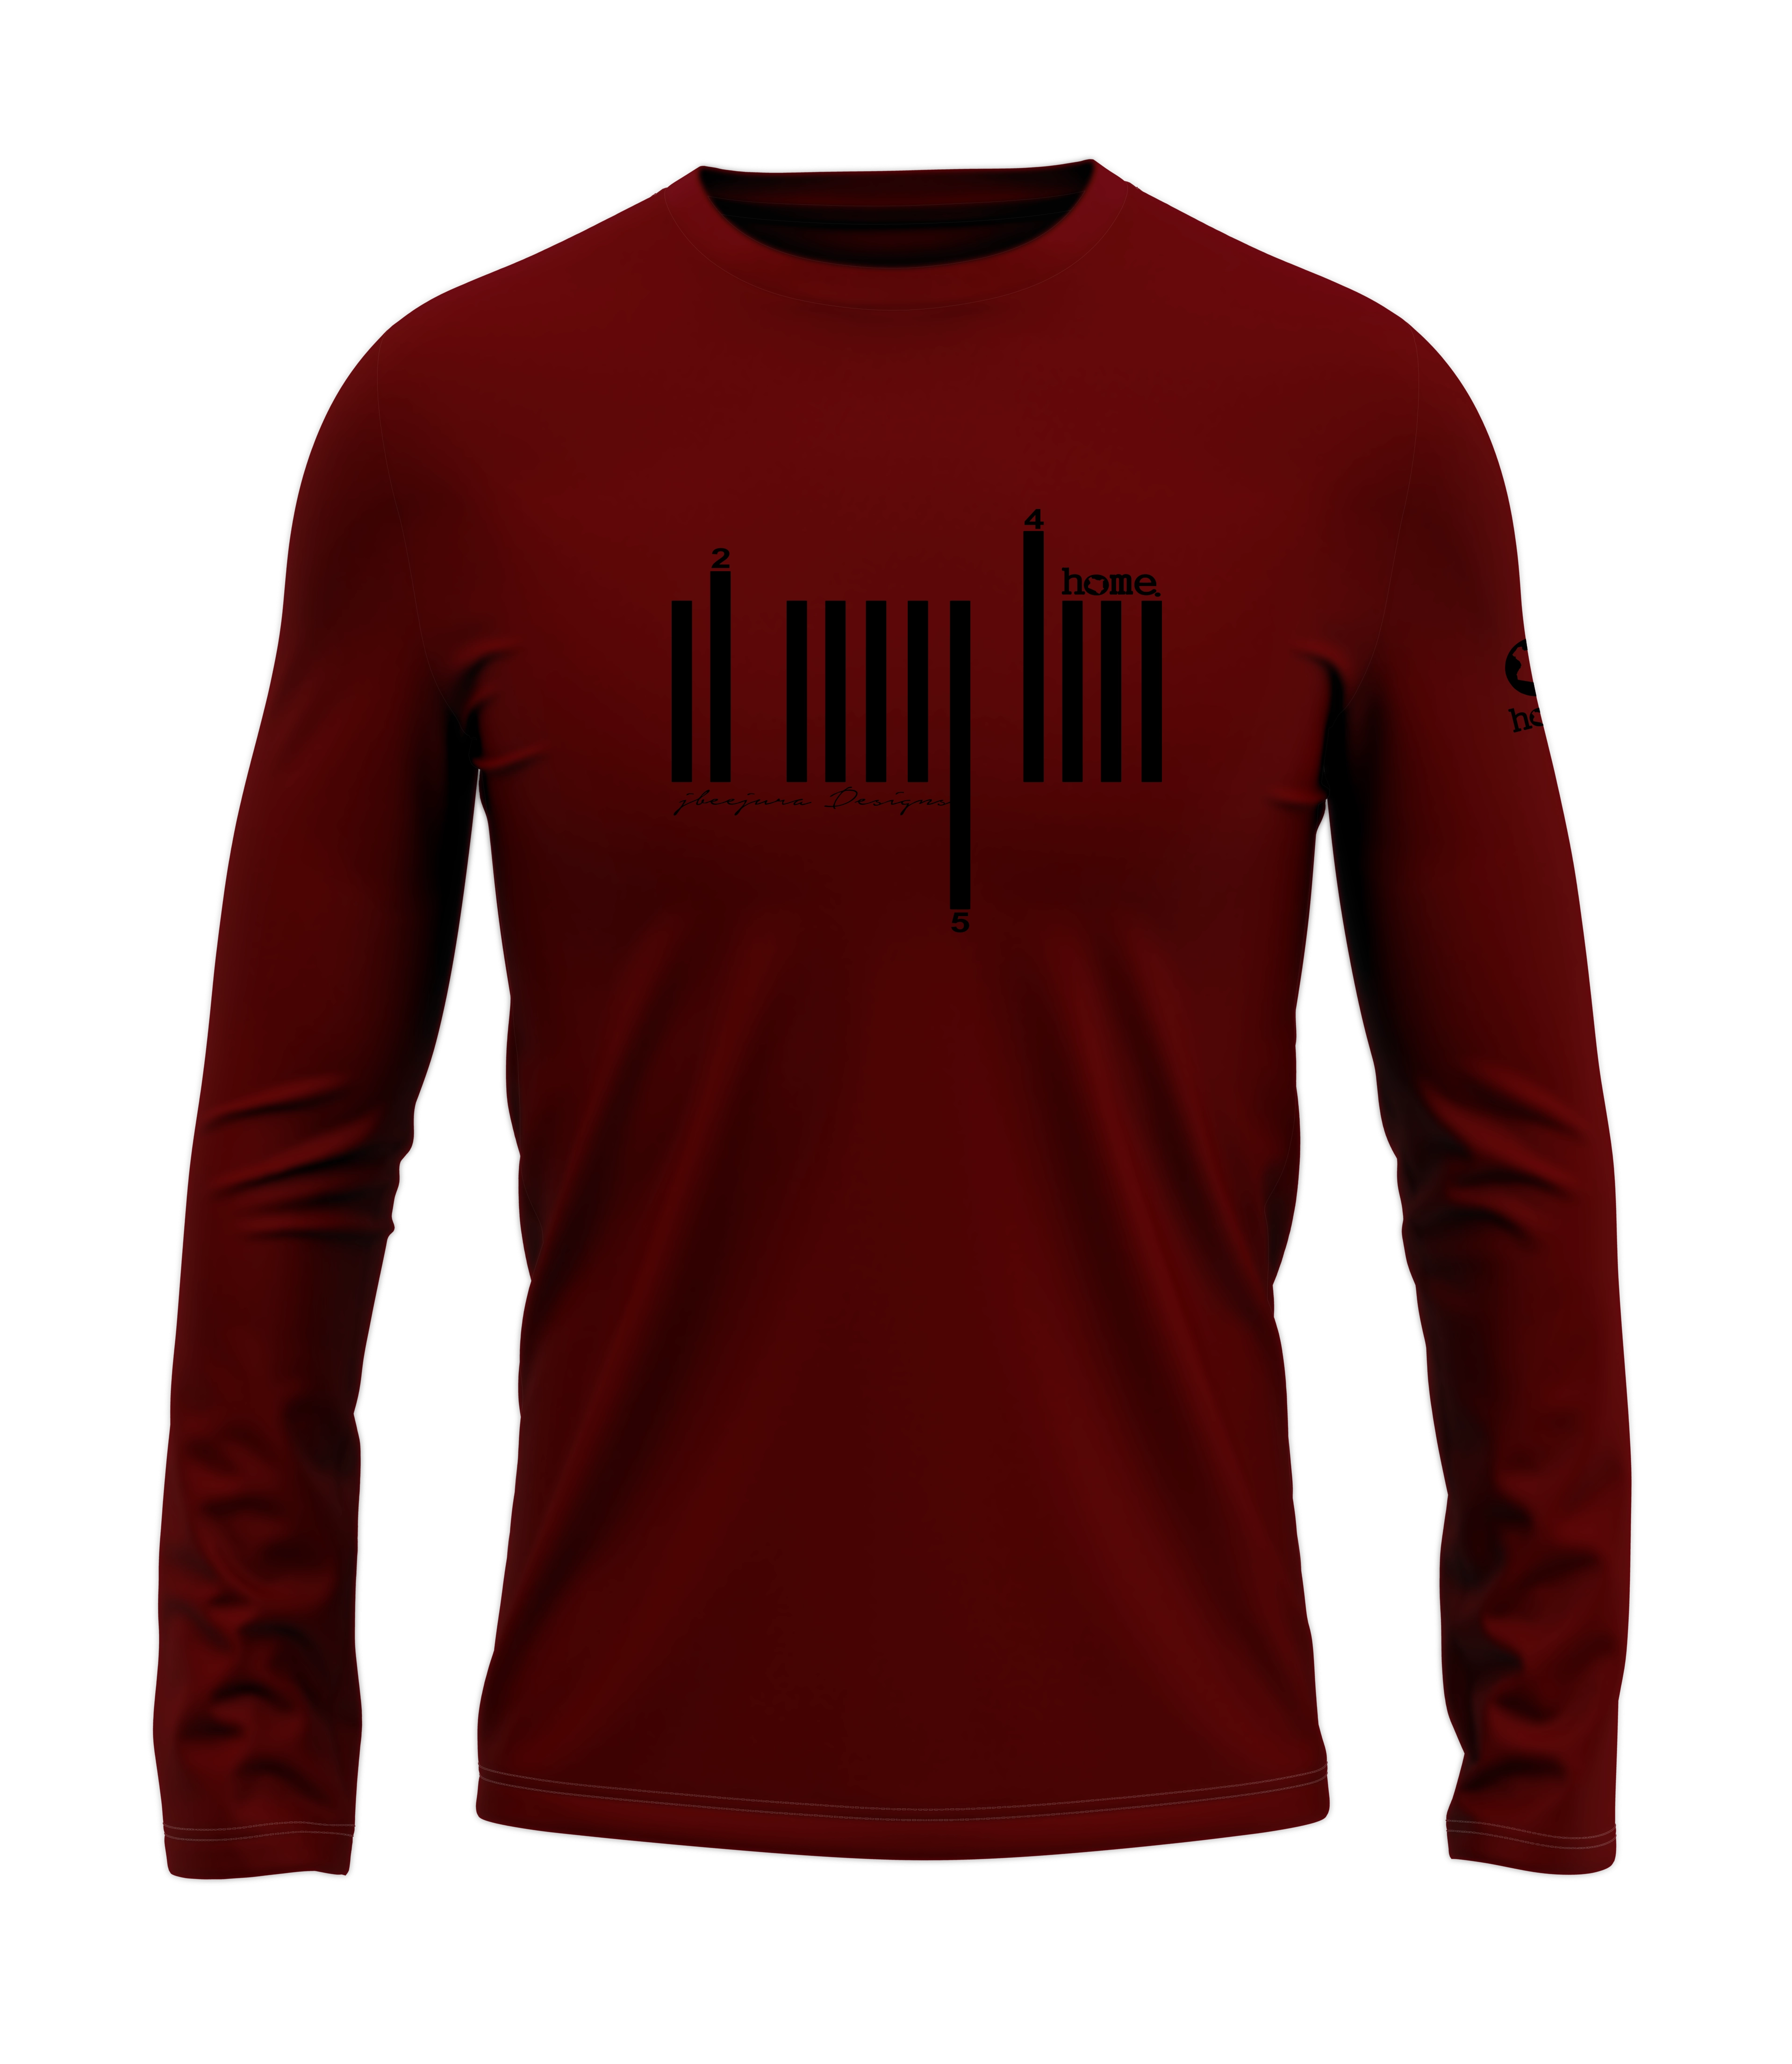 home_254 LONG-SLEEVED MAROON RED T-SHIRT WITH A BLACK BARS PRINT – COTTON PLUS FABRIC